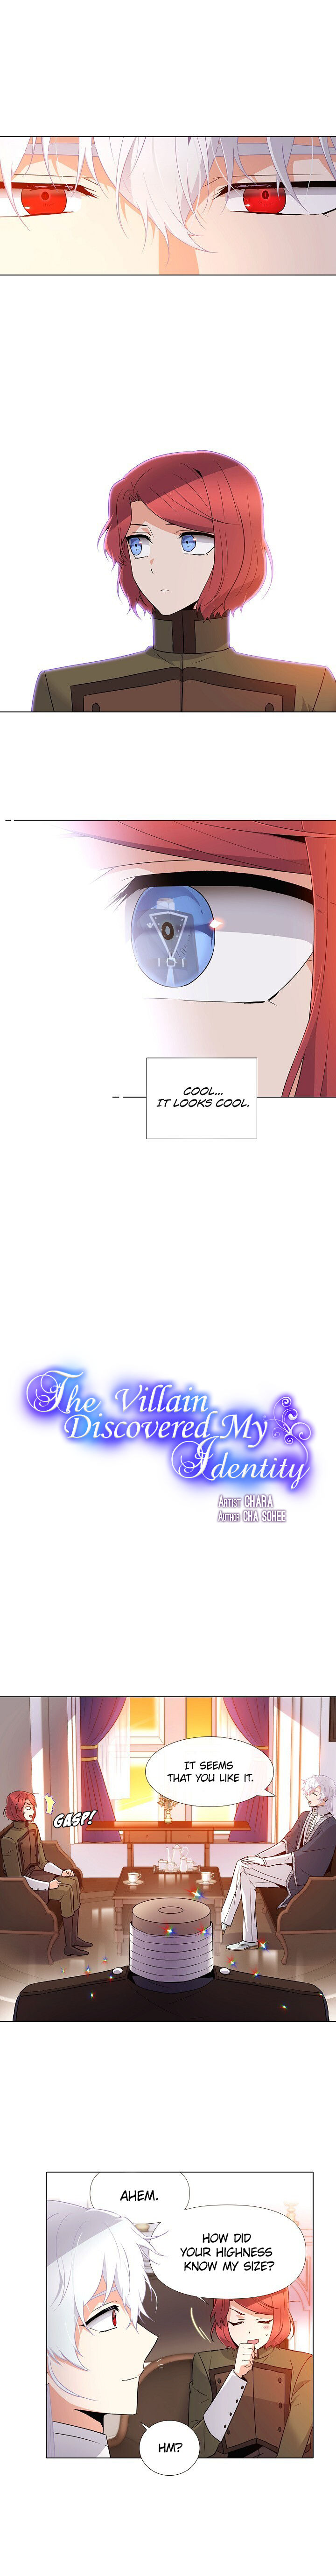 The Villain Discovered My Identity - Chapter 15 Page 5